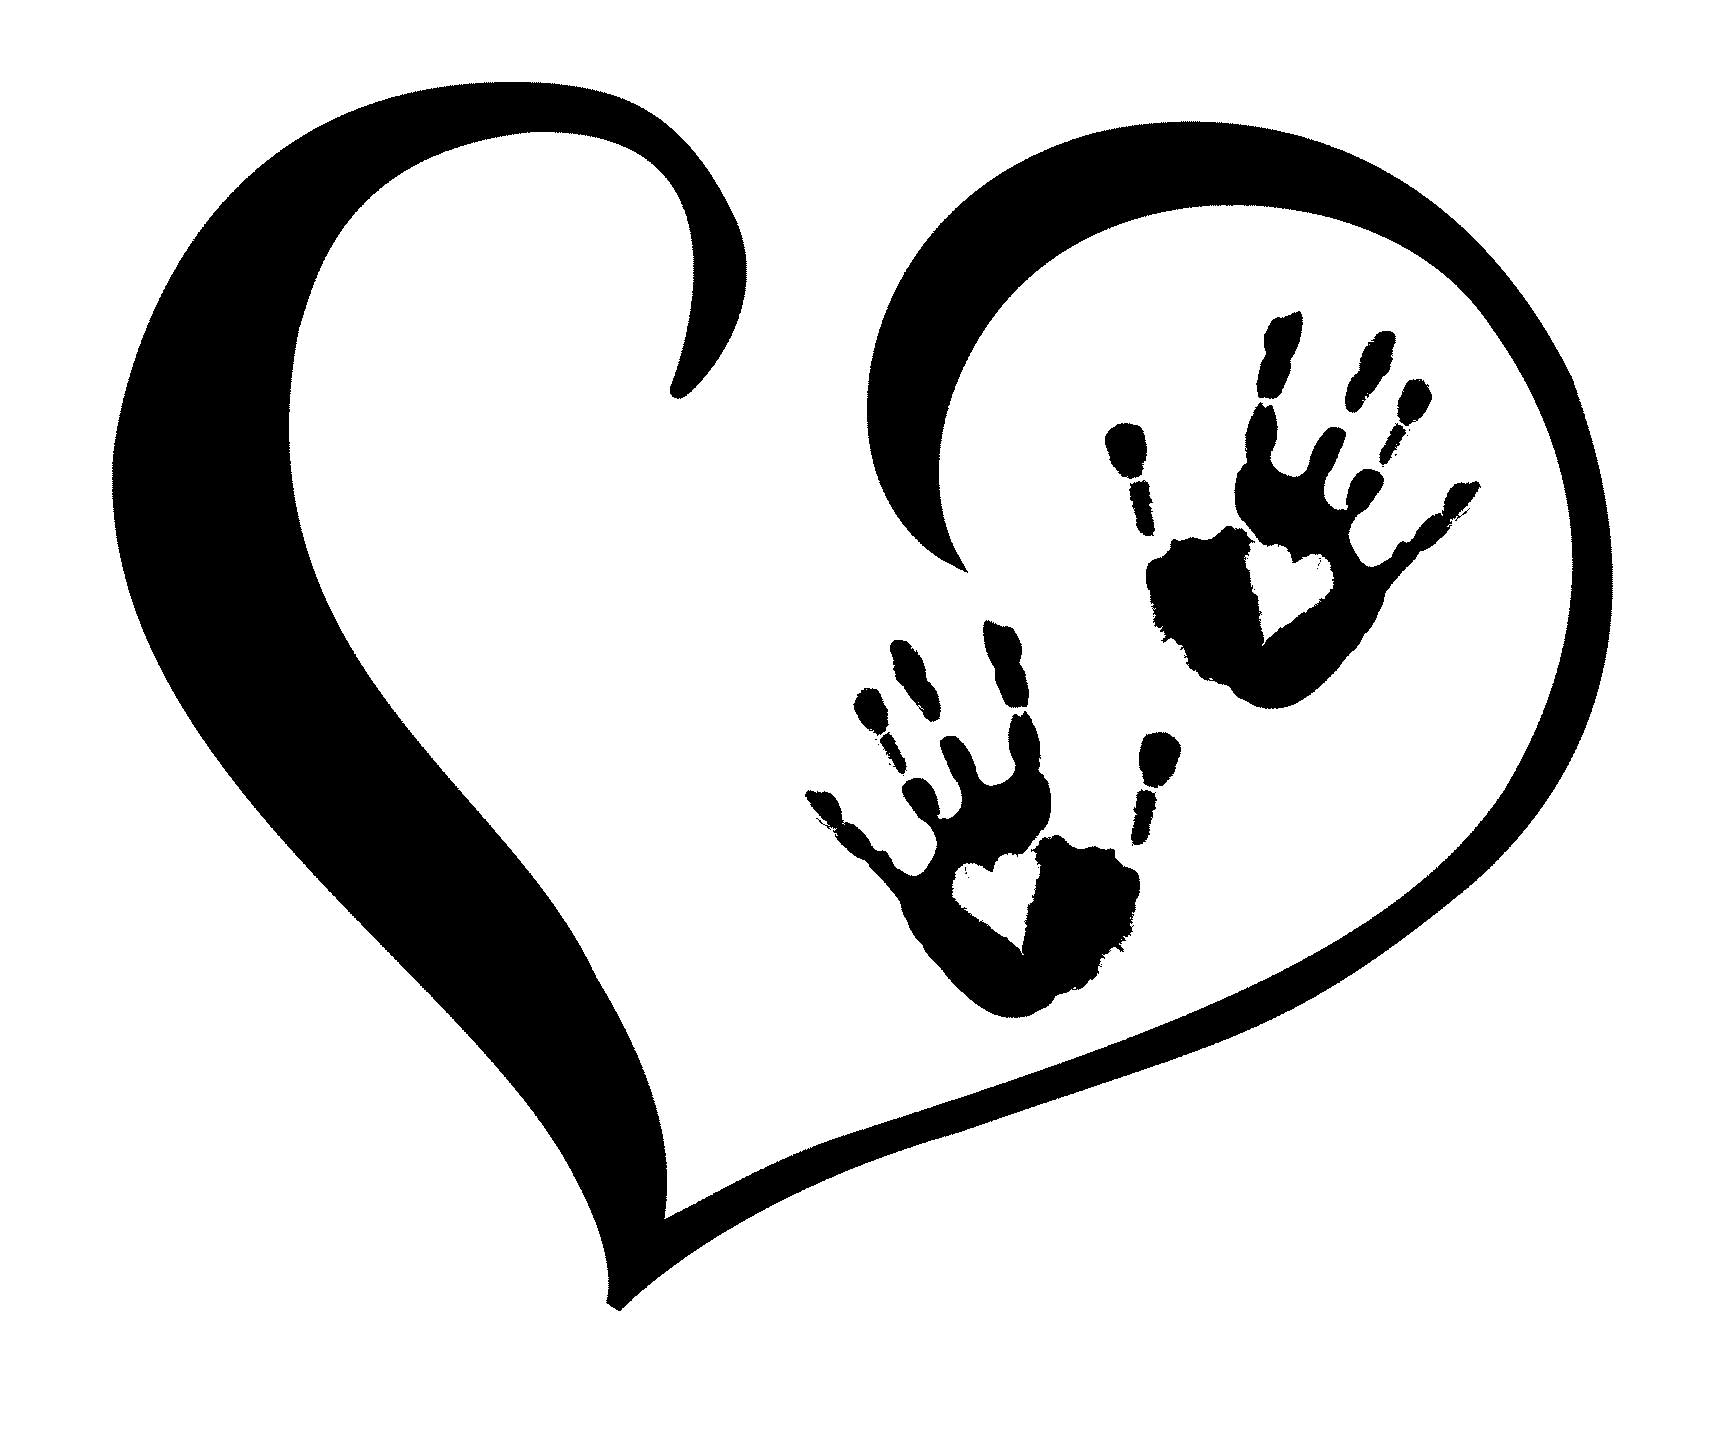 Hand print clipart black and white